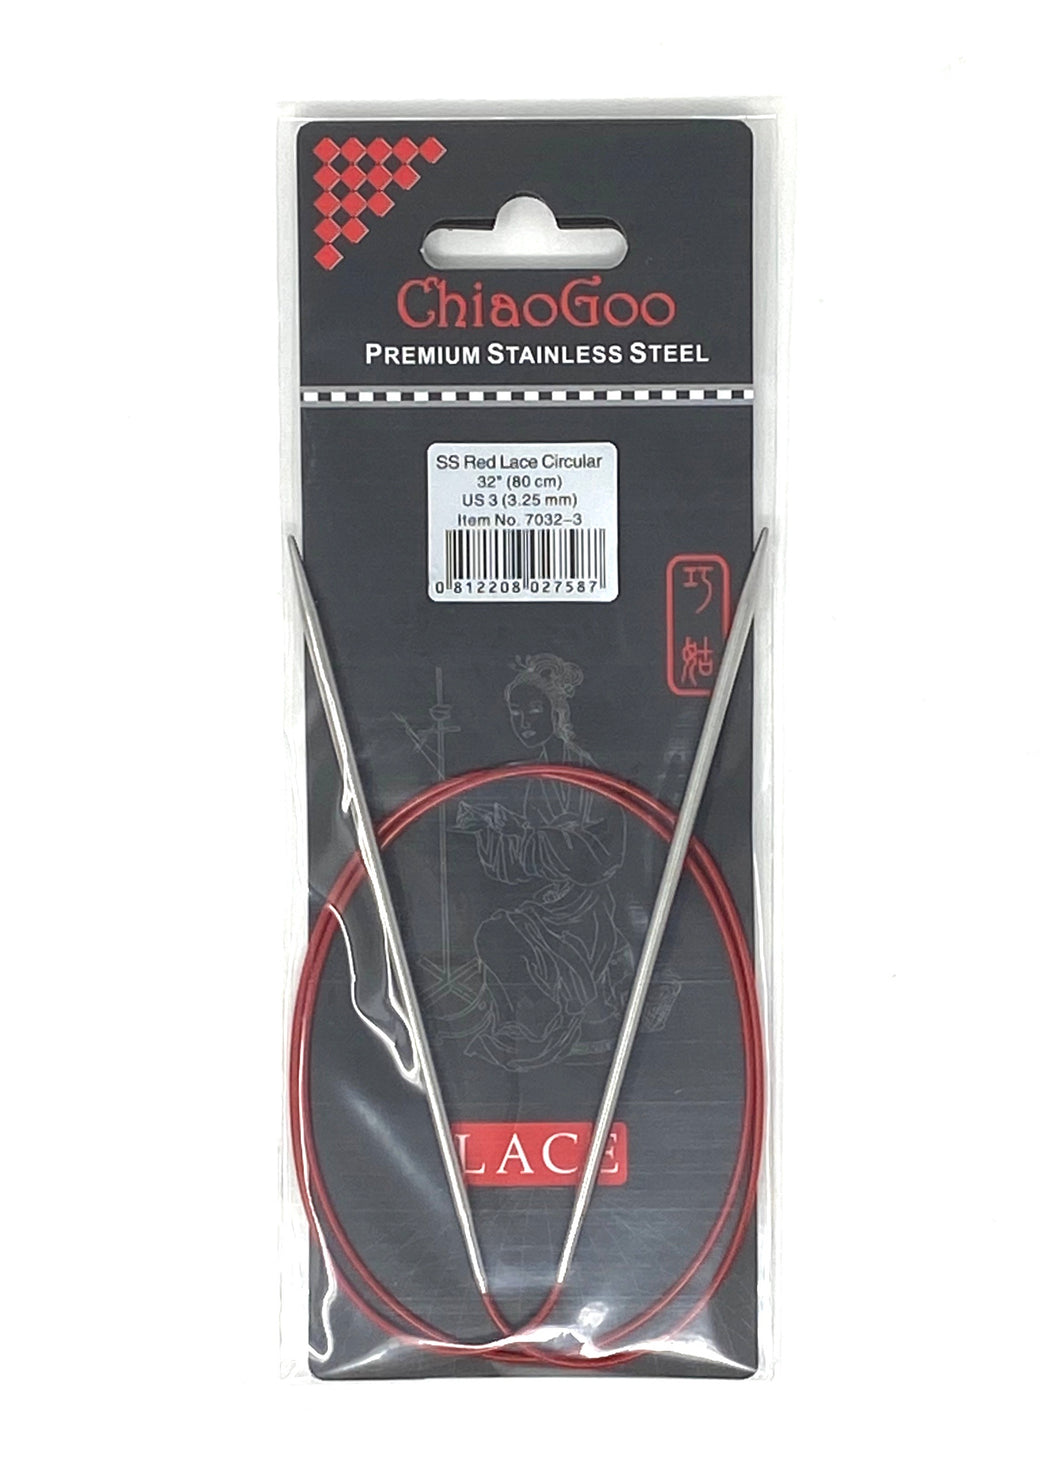 ChiaoGoo Red Lace Circular Needles - US 3 - 32 Inches